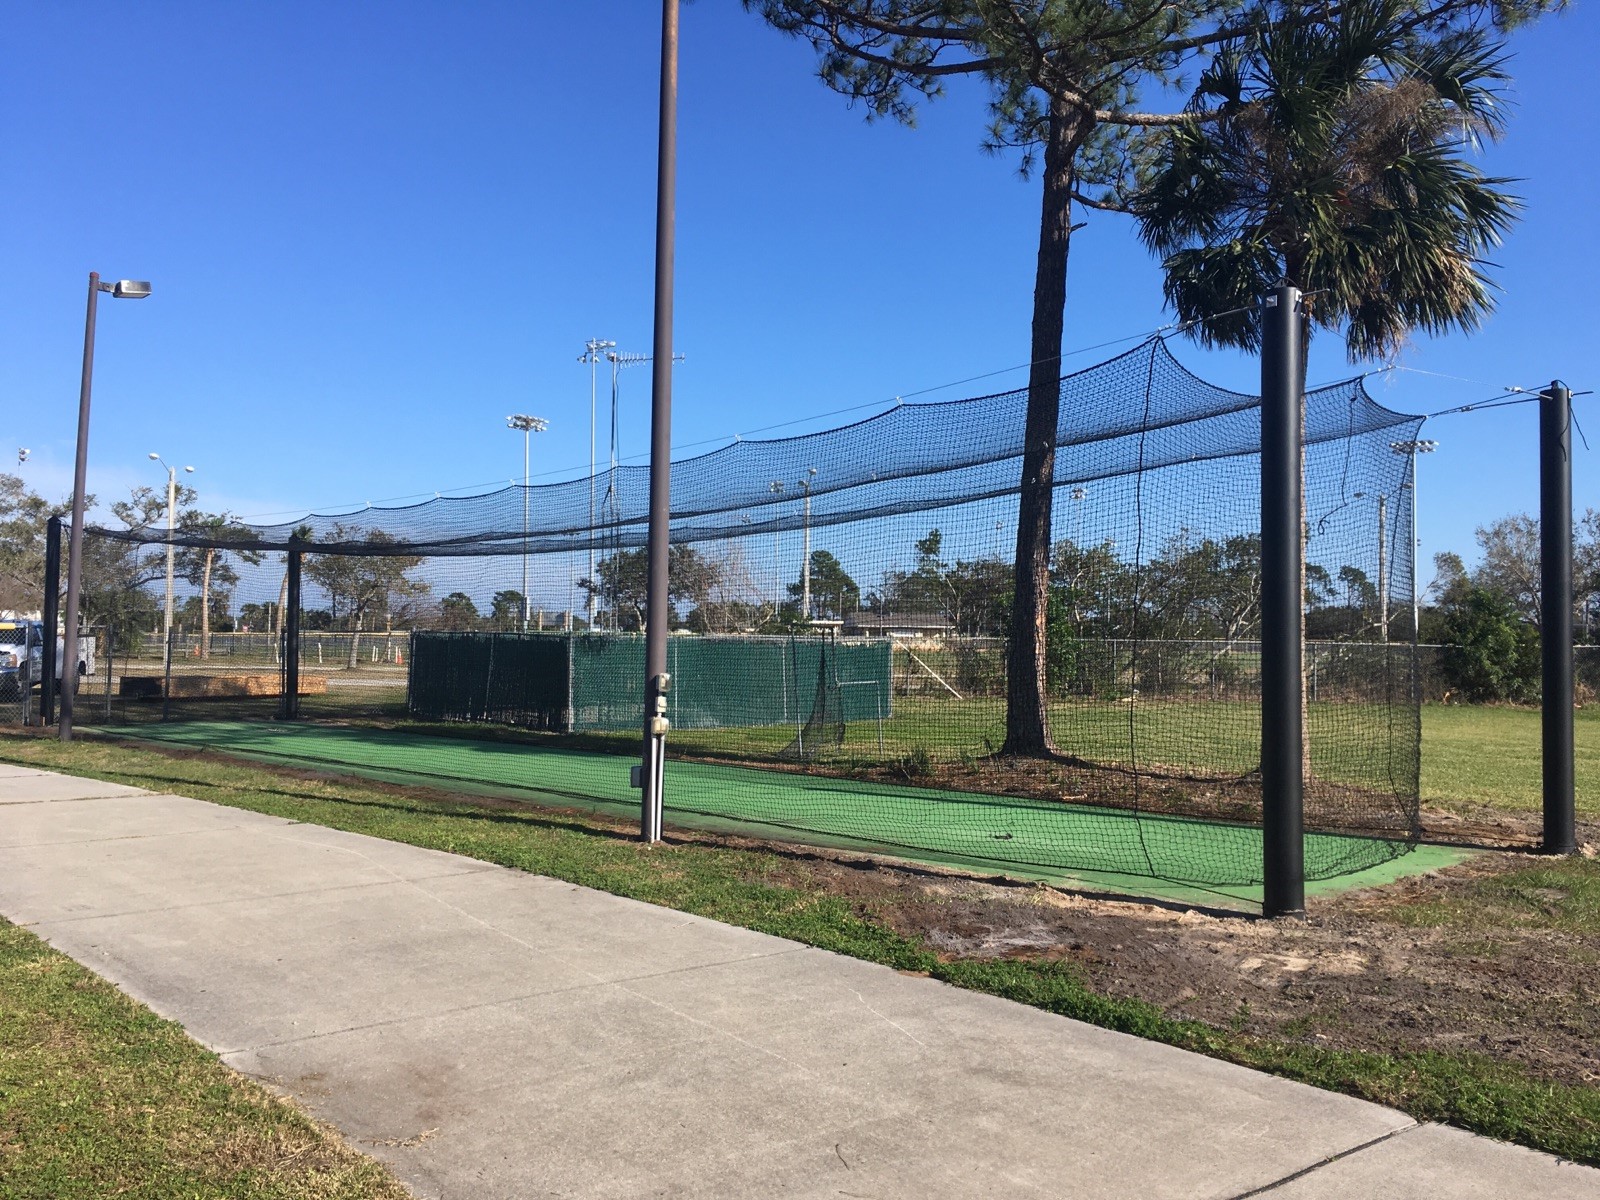 image of batting cages prior to being replaces